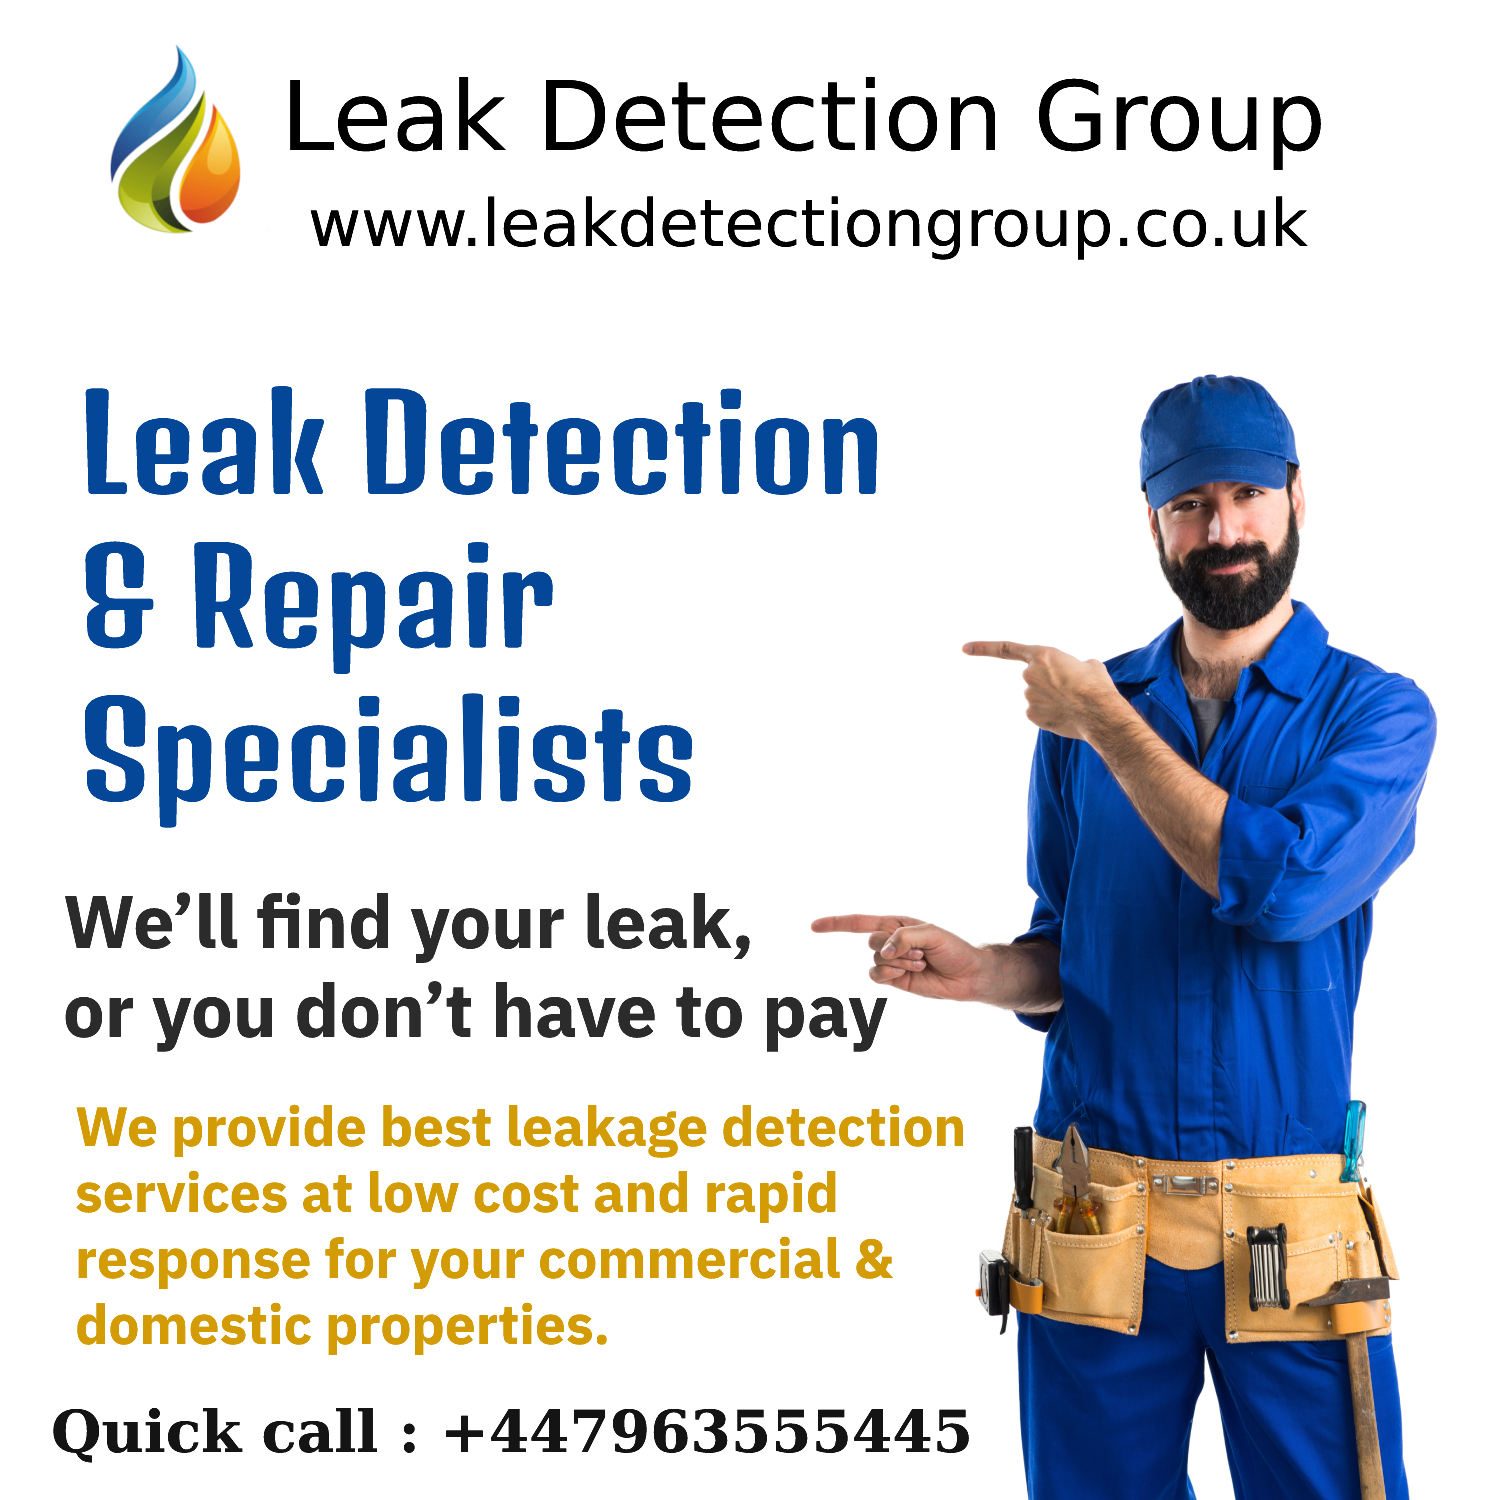 UK Leak Detection Specialists | Leak Detection Group of Company